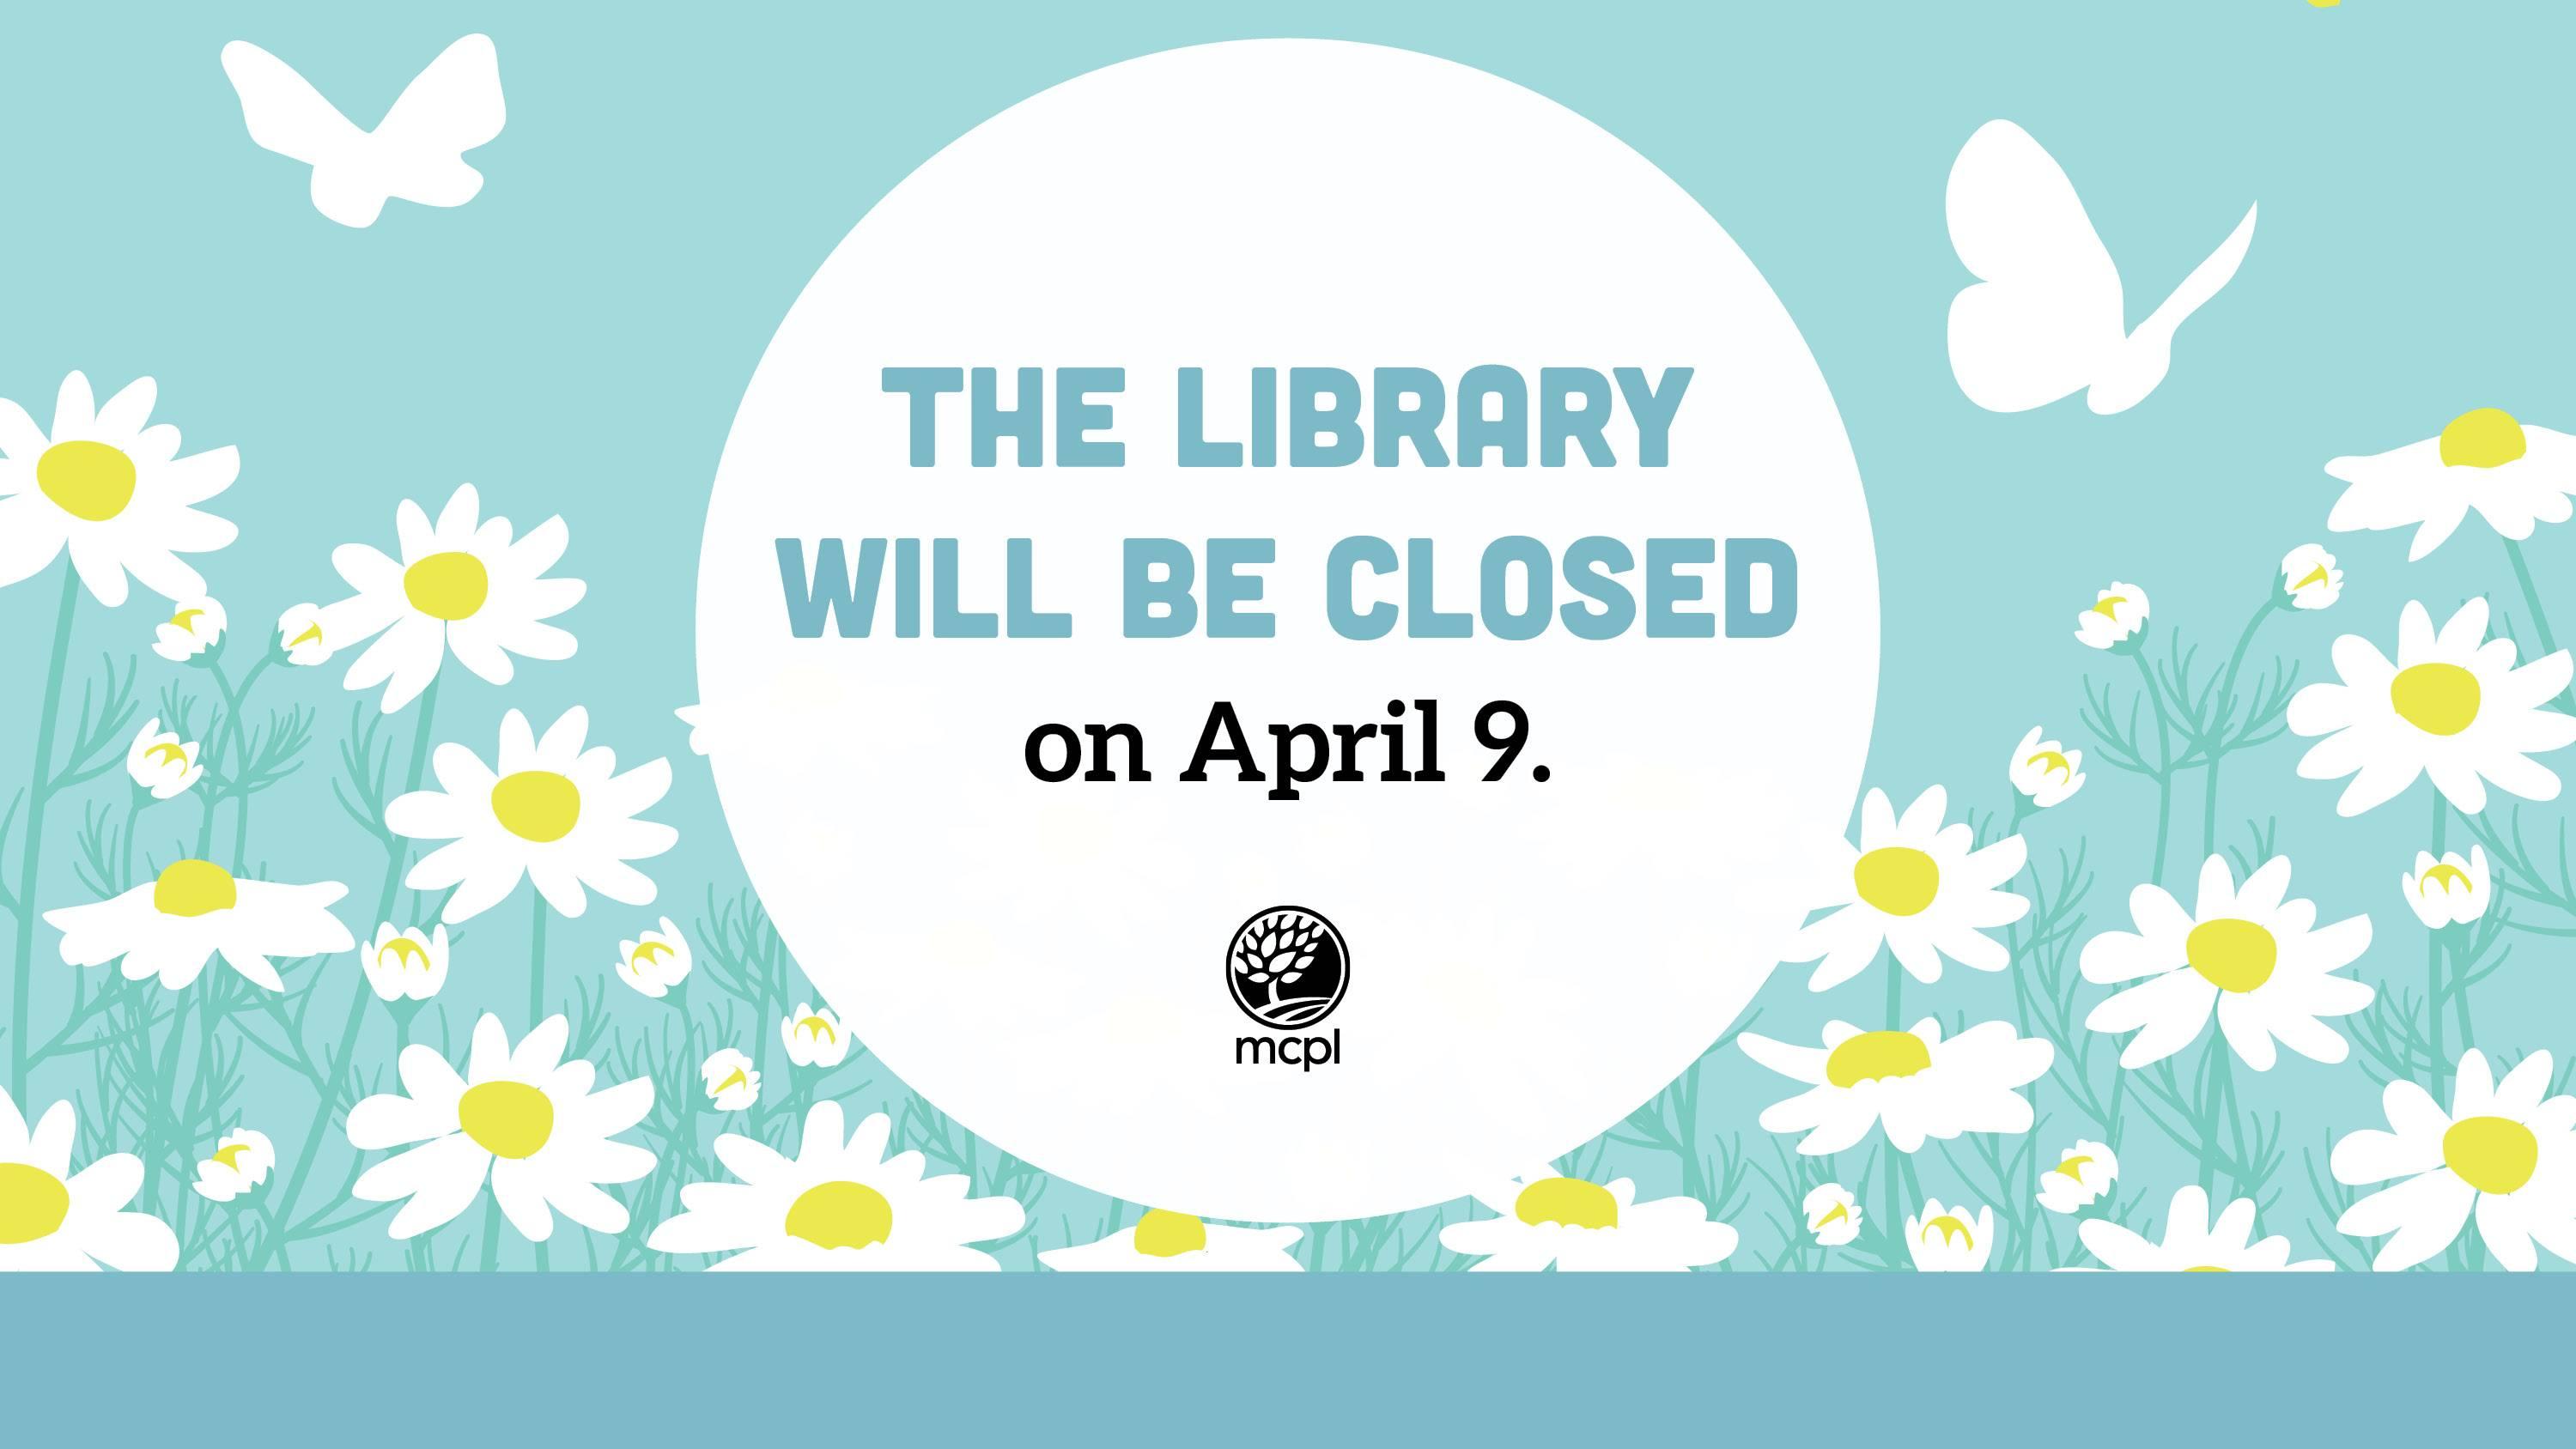 The Library will be closed on April 9.